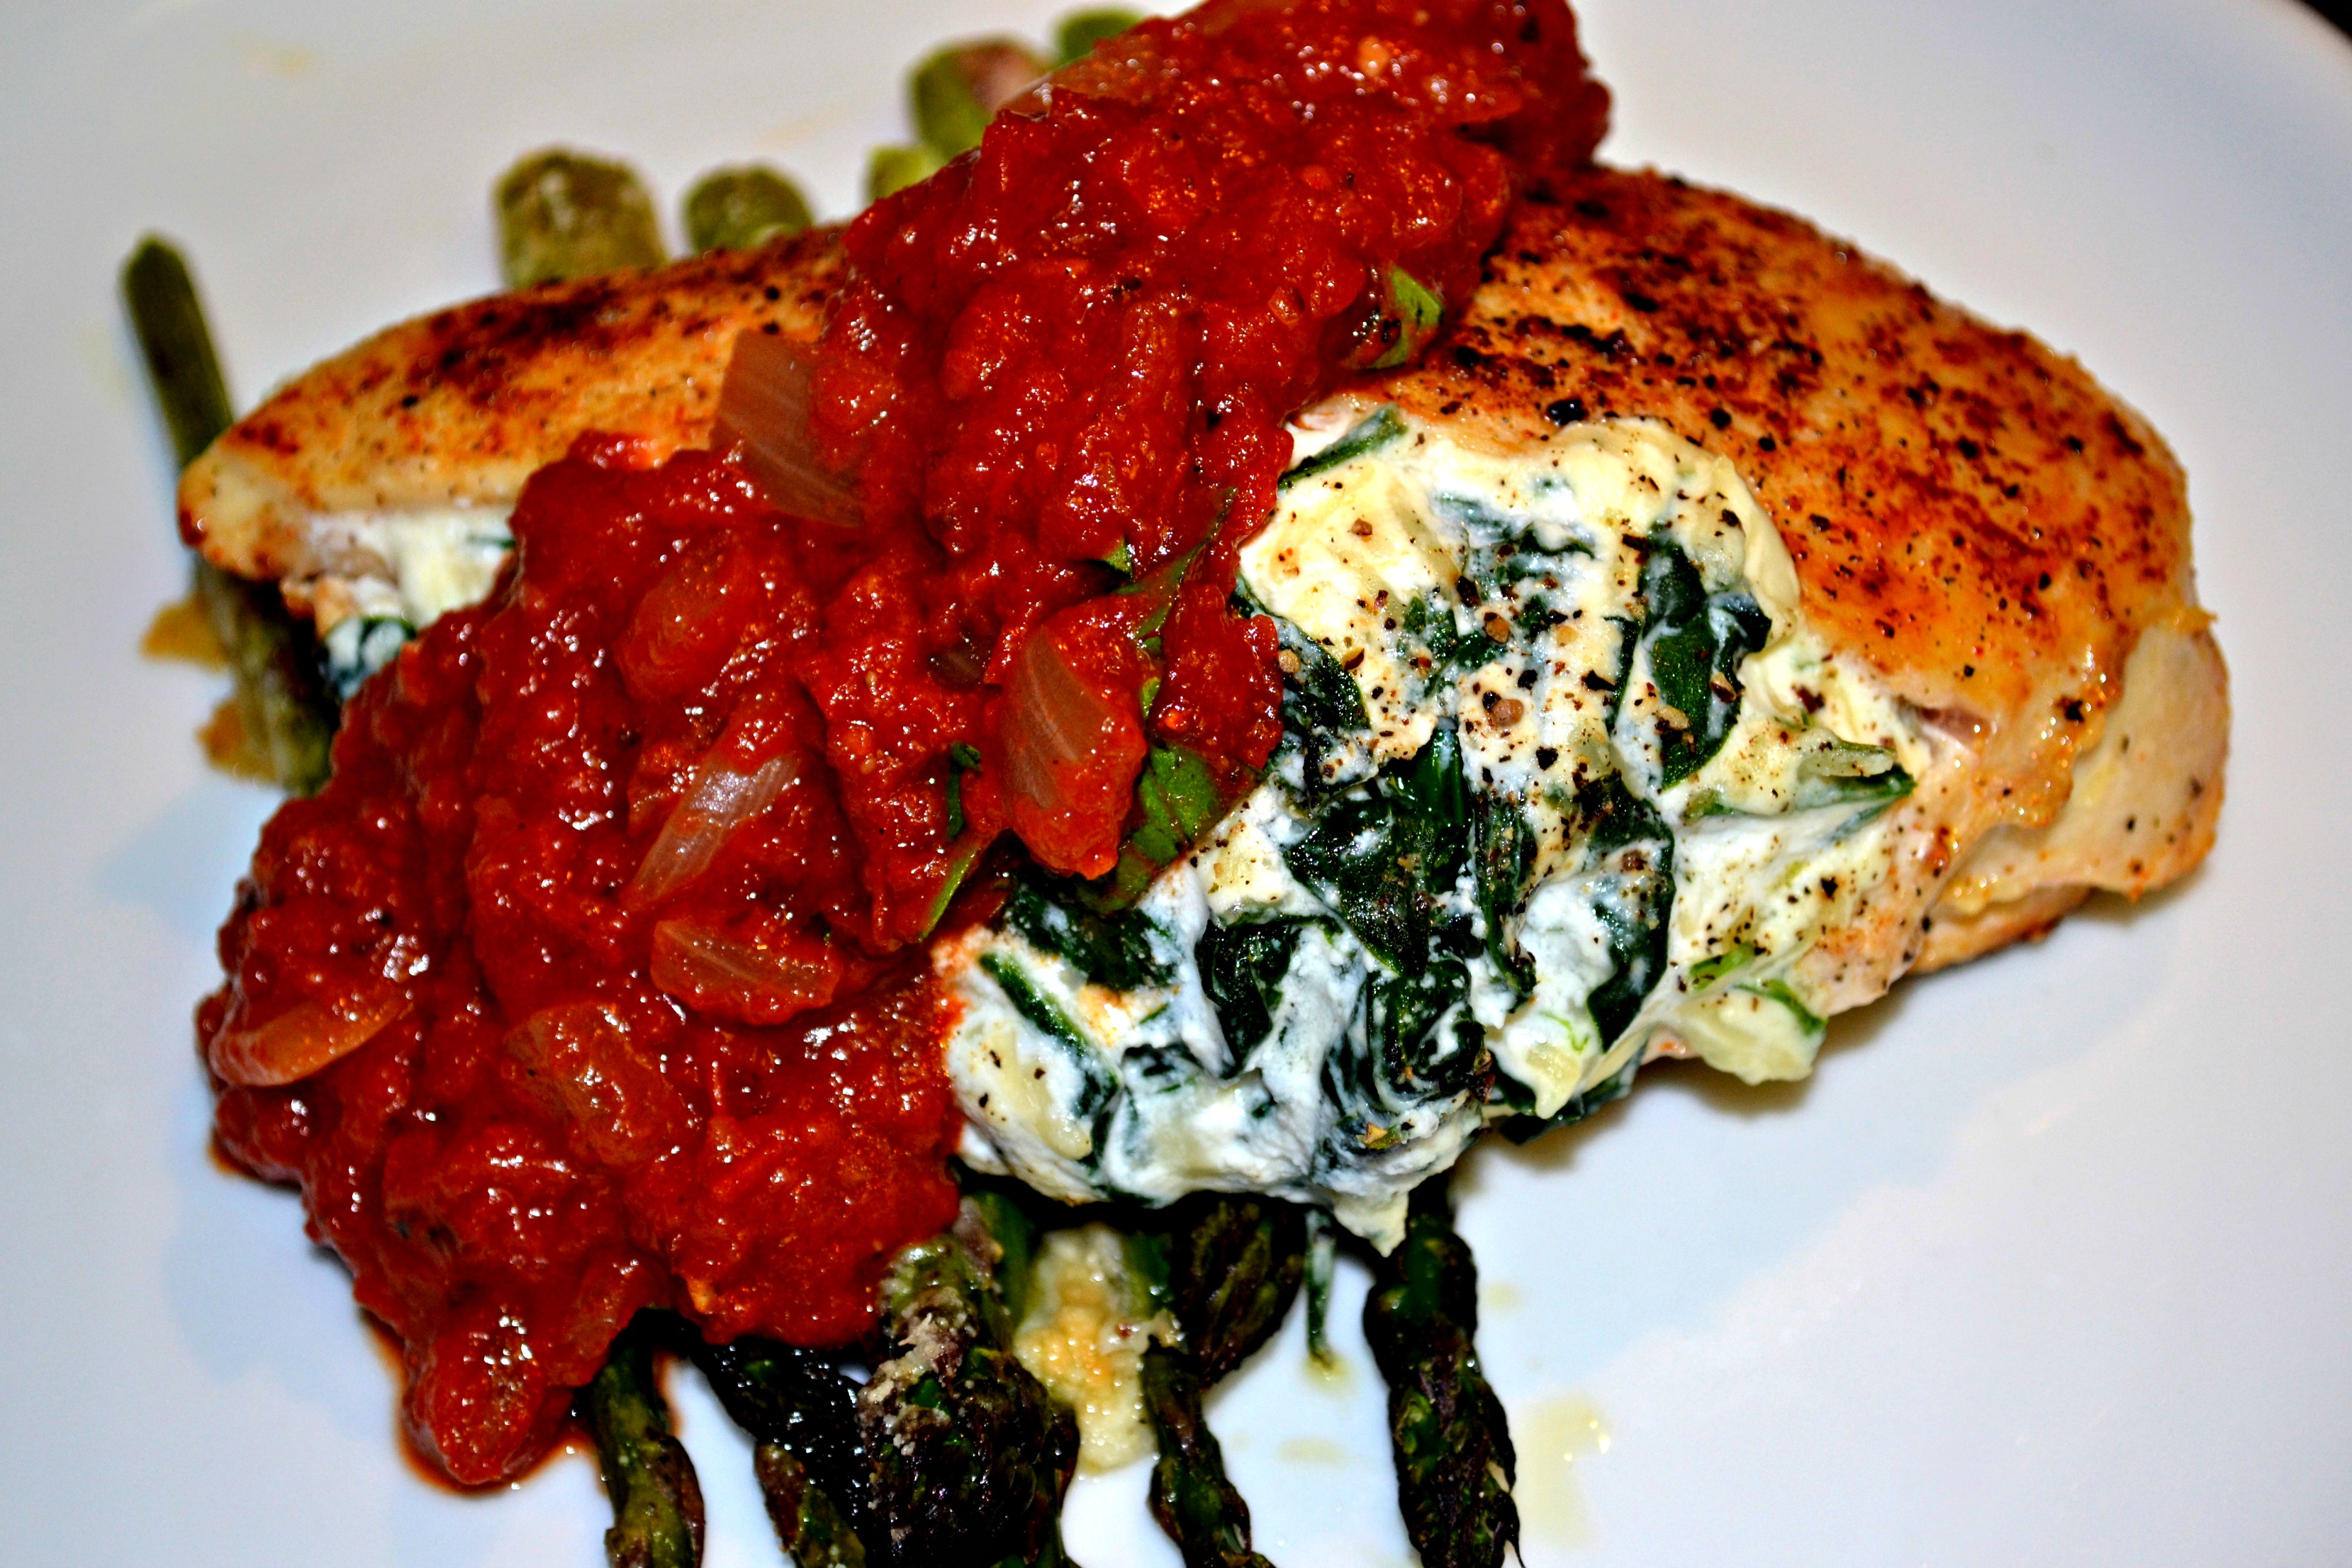 Ricotta and Spinach Stuffed Chicken with an Herb-Tomato Sauce